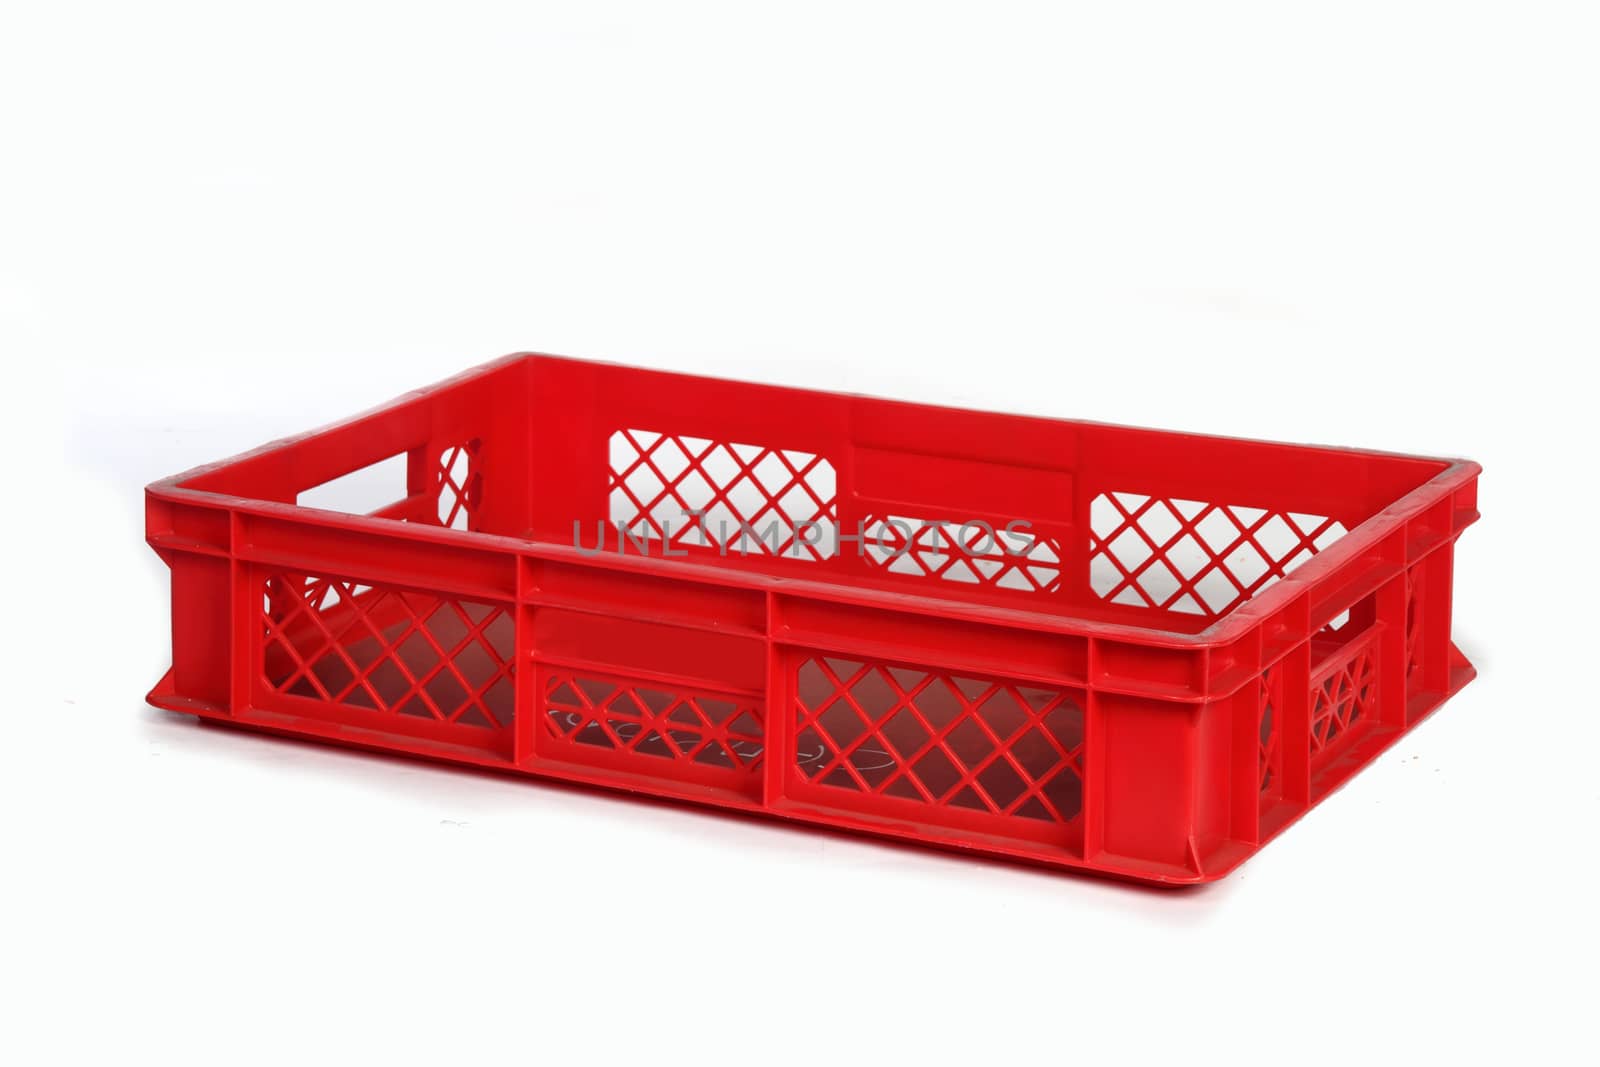 plastic crate red by diecidodici